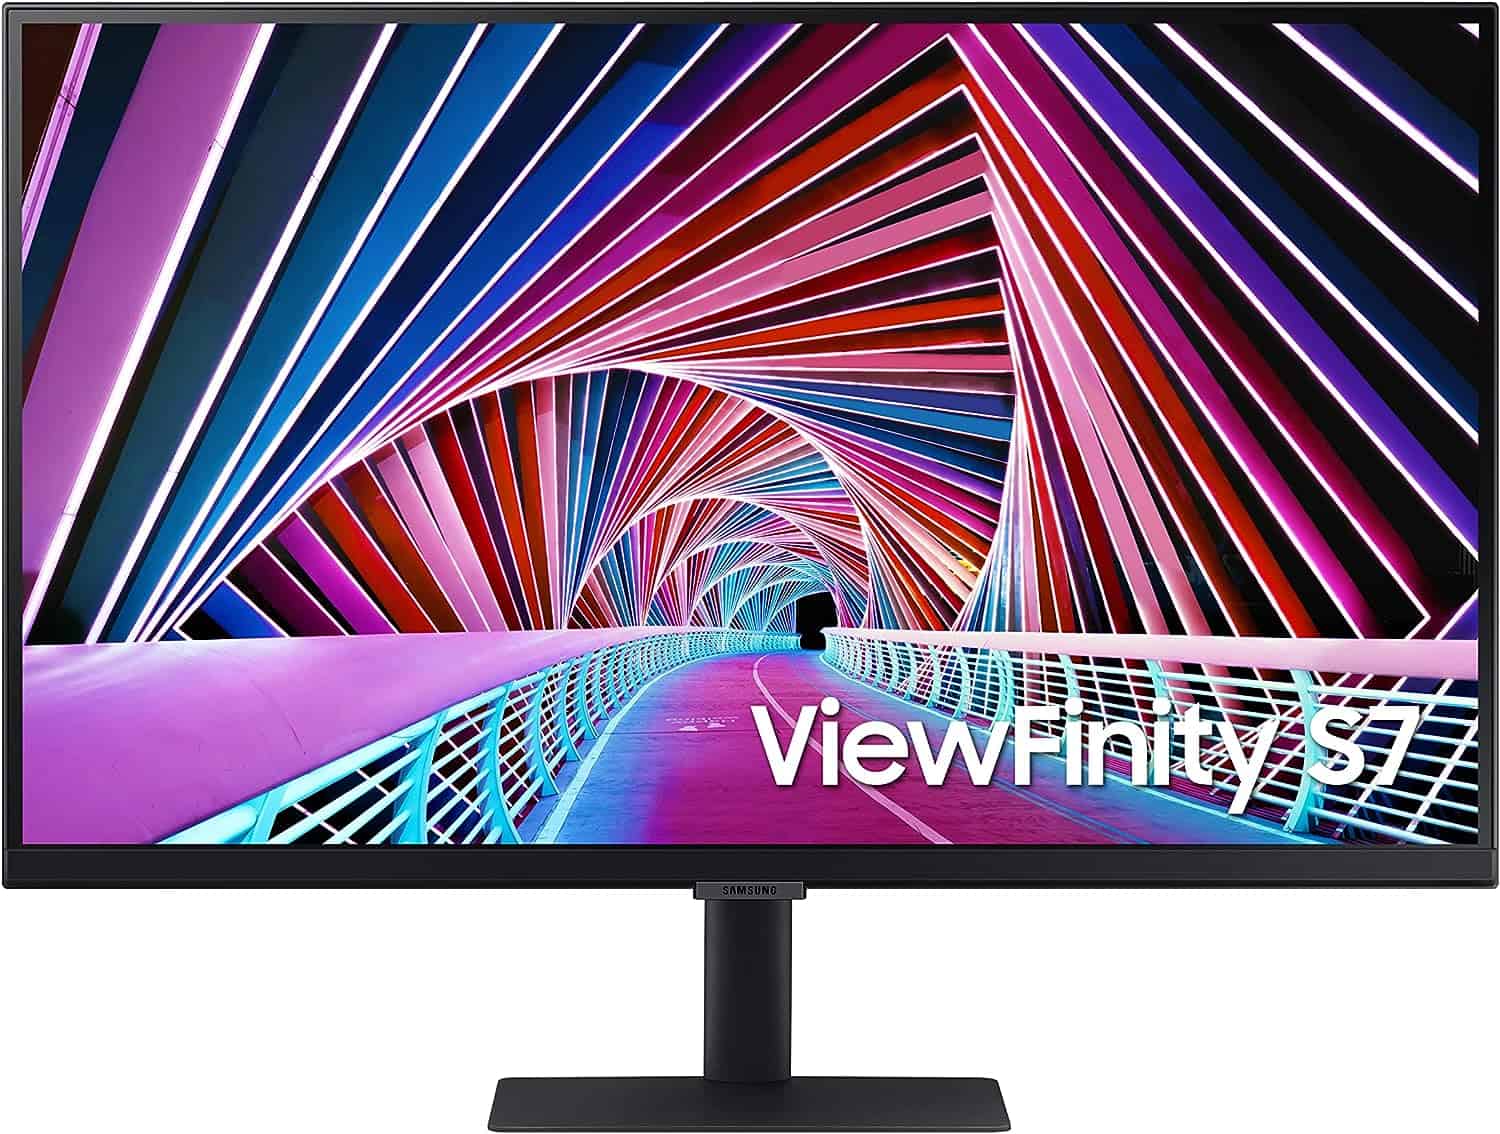 cuts price of super-affordable 4K monitor to under $300 in surprise  deal - PC Guide